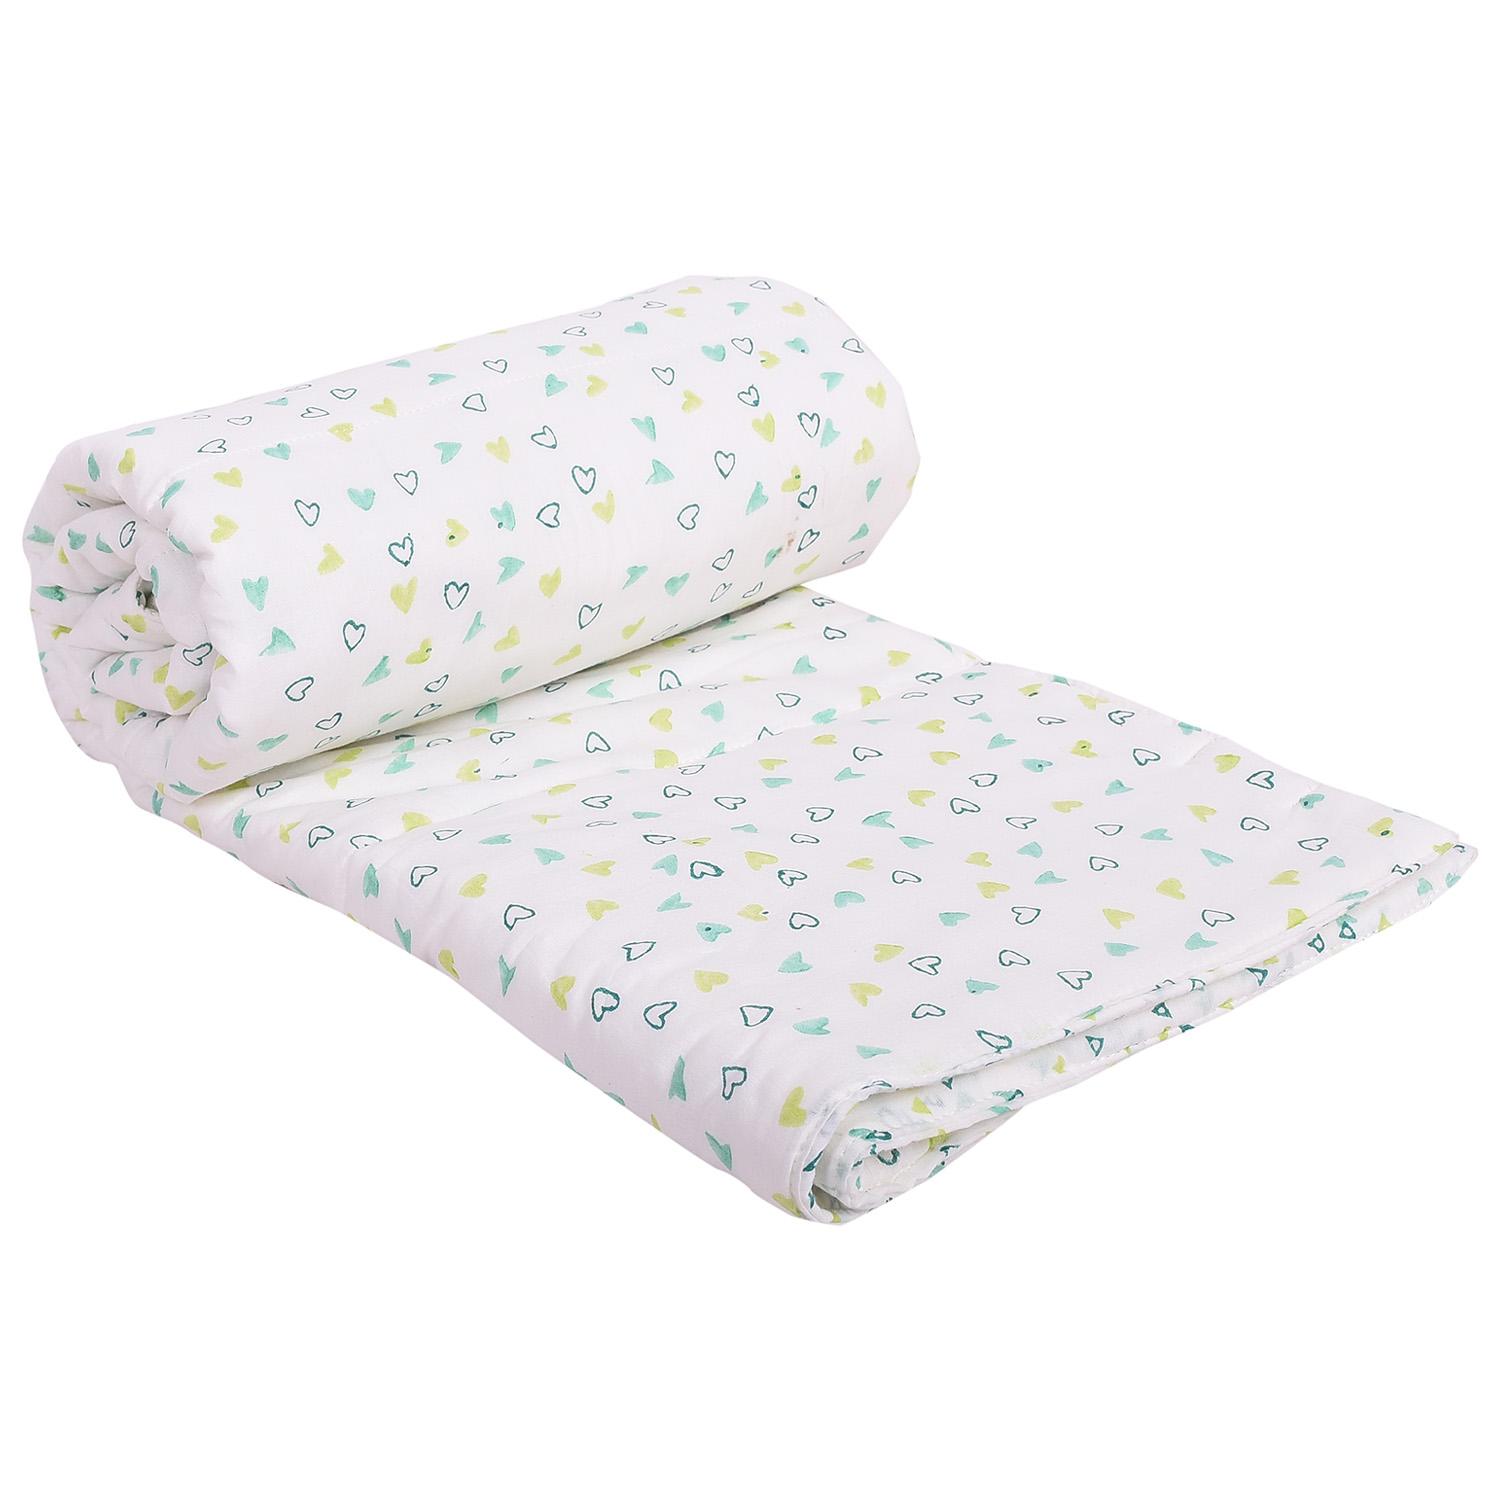 Baby Organic Cotton Muslin Foldable Mosquito Net Bedding and  Baby AC Quilt blanket- 0-3 Year-110x120  - Green Heart